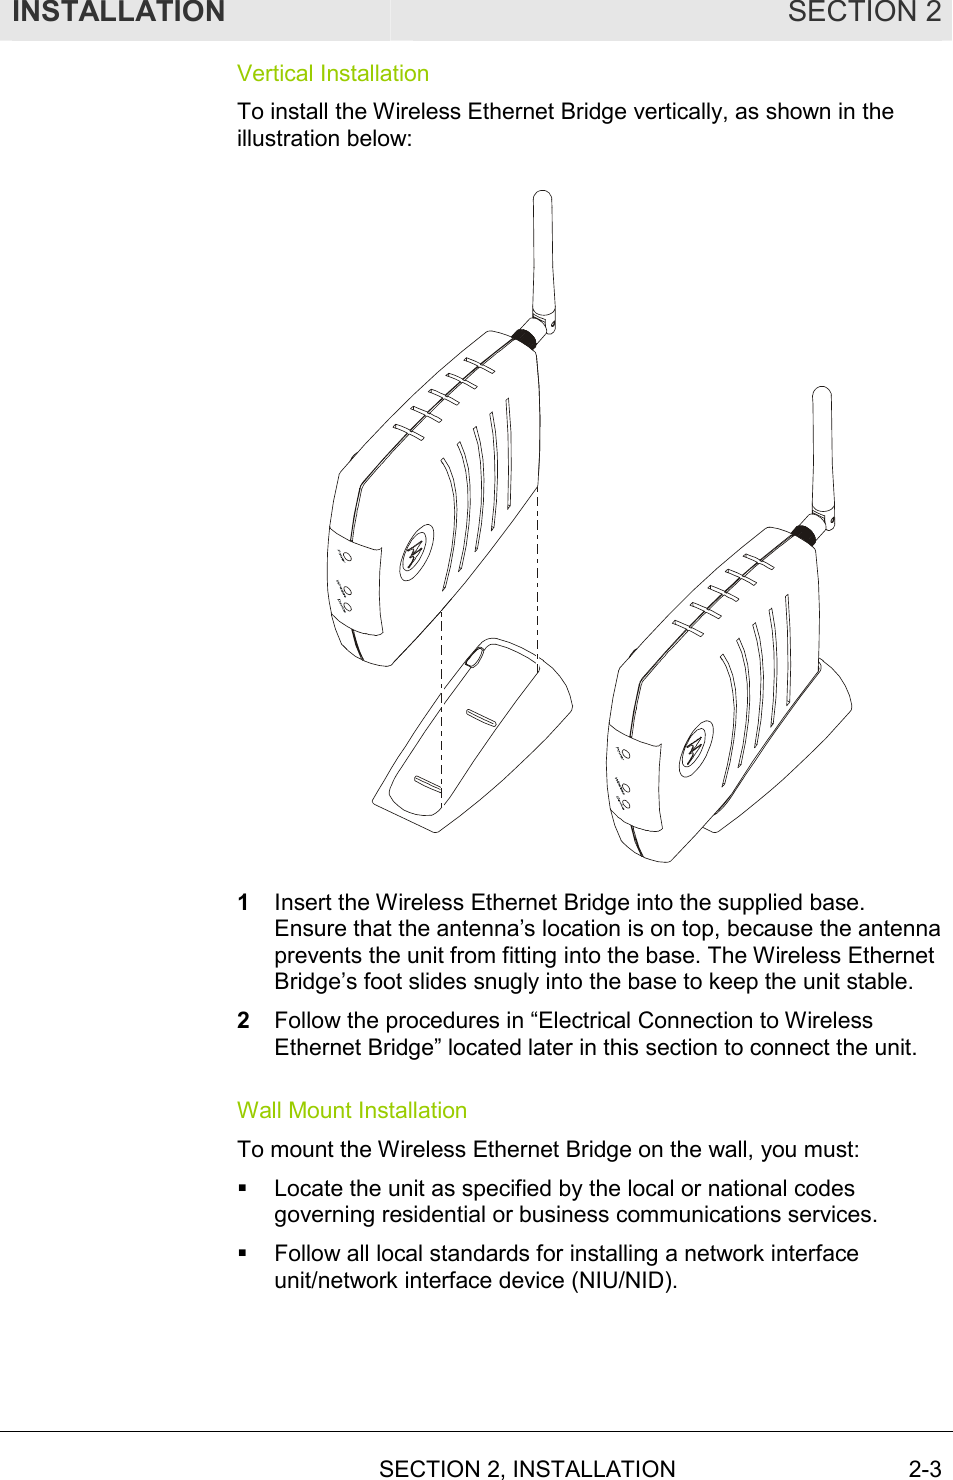 INSTALLATION SECTION 2  SECTION 2, INSTALLATION 2-3 Vertical Installation To install the Wireless Ethernet Bridge vertically, as shown in the illustration below:  1  Insert the Wireless Ethernet Bridge into the supplied base. Ensure that the antenna’s location is on top, because the antenna prevents the unit from fitting into the base. The Wireless Ethernet Bridge’s foot slides snugly into the base to keep the unit stable. 2  Follow the procedures in “Electrical Connection to Wireless Ethernet Bridge” located later in this section to connect the unit. Wall Mount Installation To mount the Wireless Ethernet Bridge on the wall, you must: !  Locate the unit as specified by the local or national codes governing residential or business communications services. !  Follow all local standards for installing a network interface unit/network interface device (NIU/NID). 